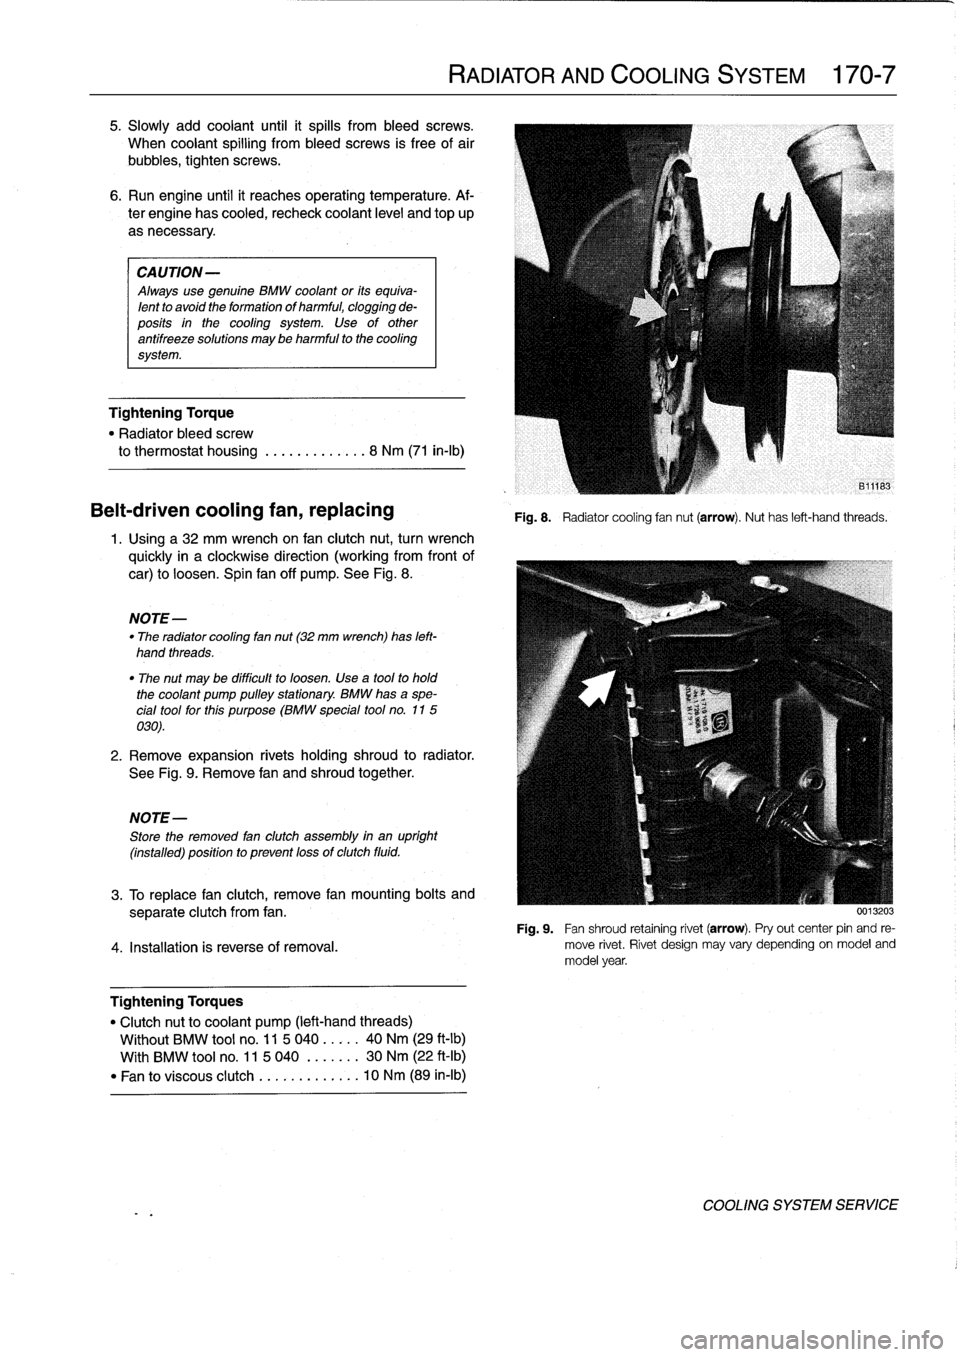 BMW 323i 1993 E36 Repair Manual 5
.
Slowly
add
coolant
until
it
spills
from
bleed
screws
.

When
coolant
spillíng
from
bleed
screws
is
free
of
air

bubbies,
tighten
screws
.

6
.
Run
engine
until
it
reaches
operatíng
temperature
.